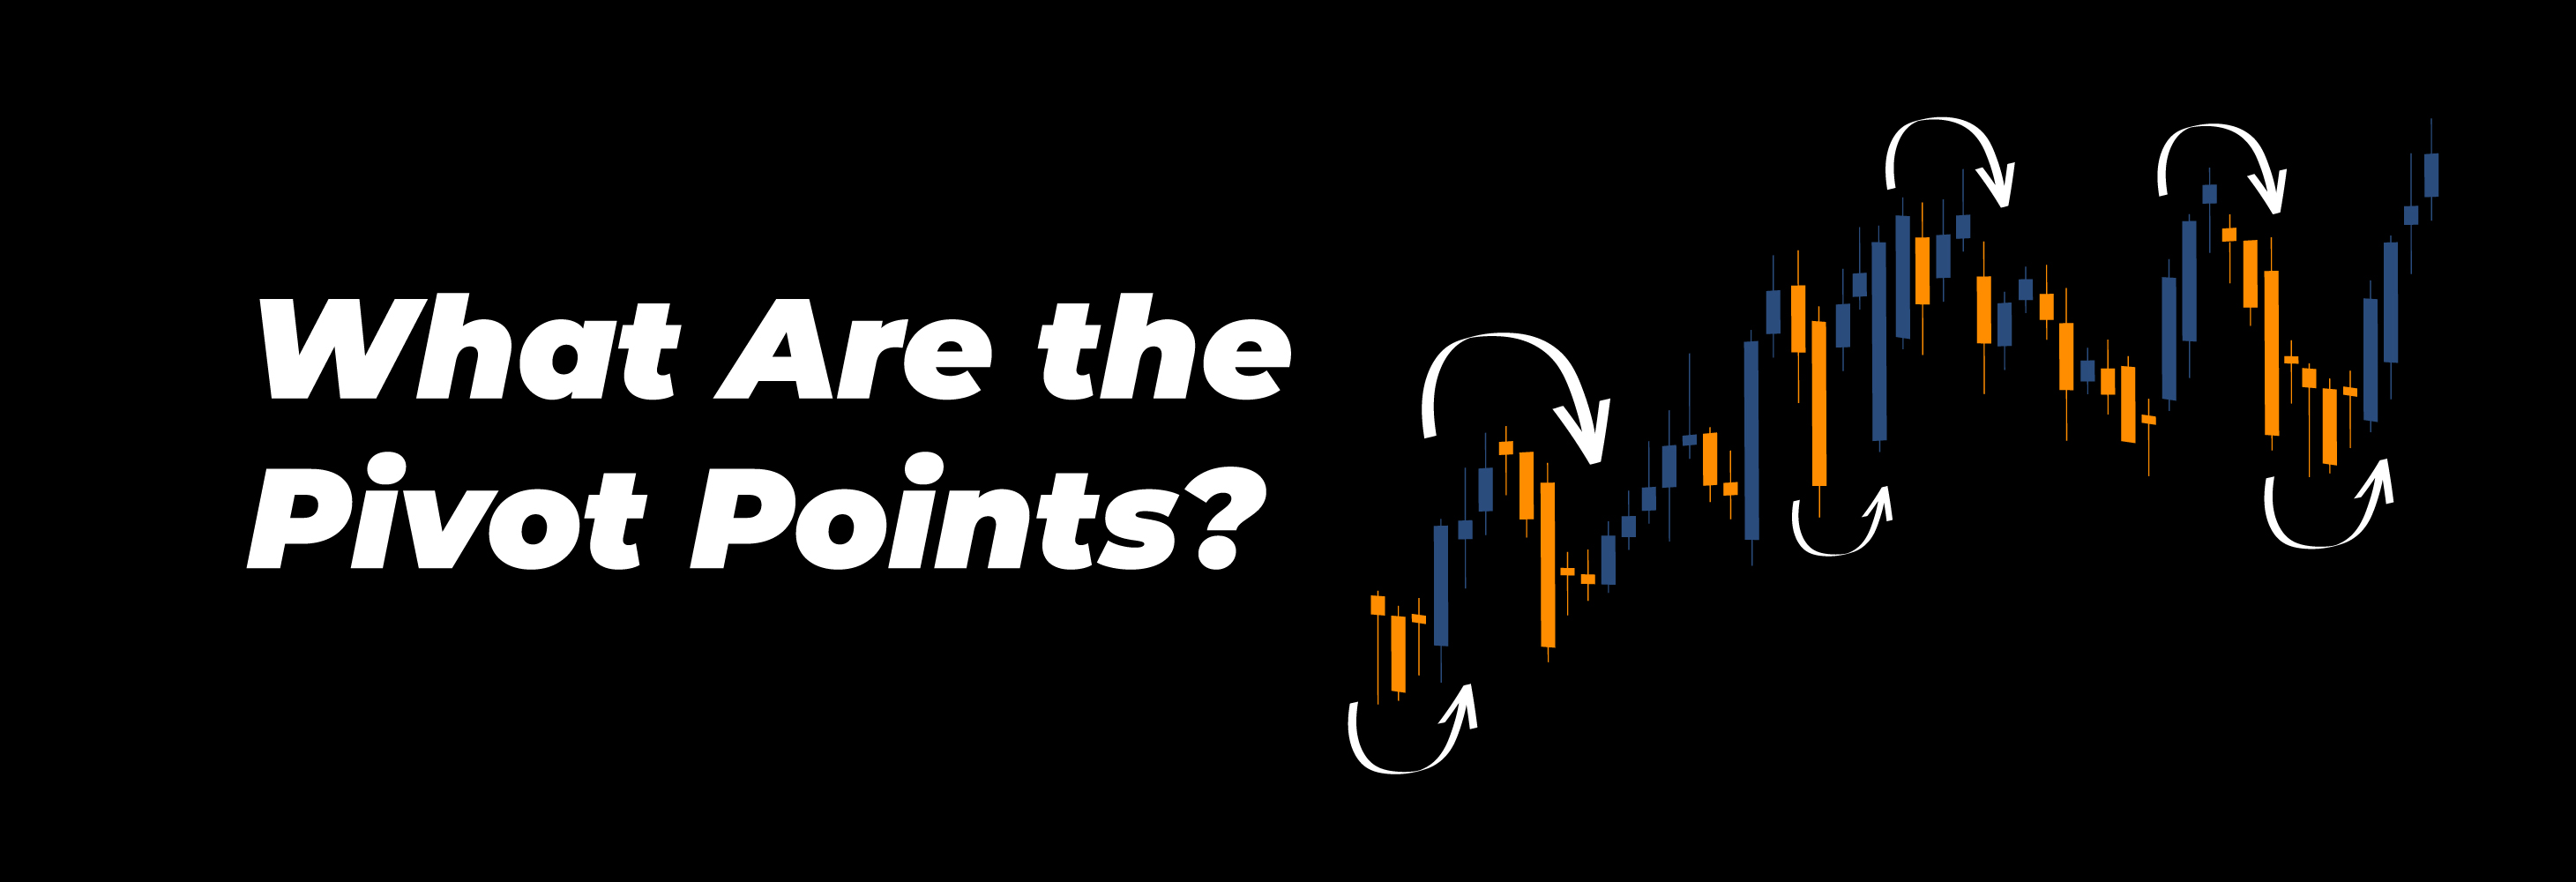 What Are Pivot Points in Forex Trading?